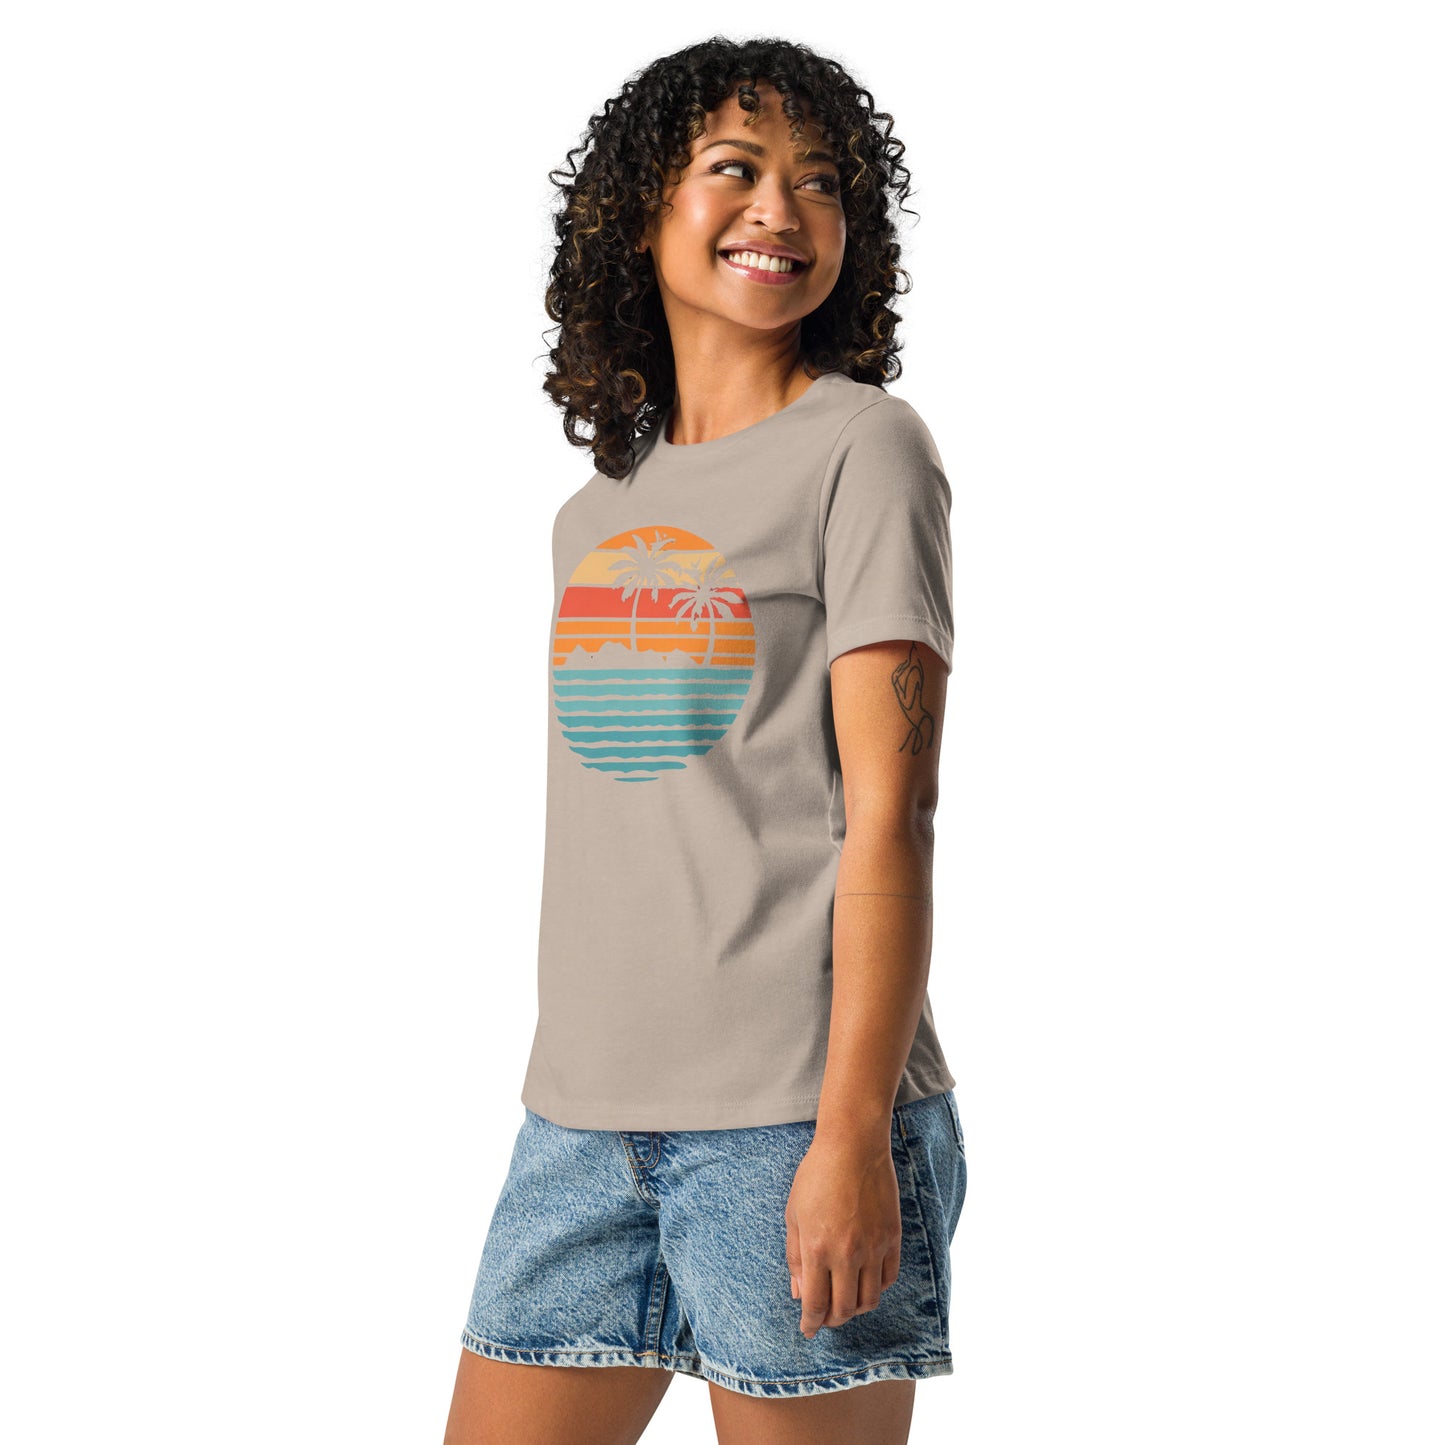 Women with stone T-shirt and a retro Island